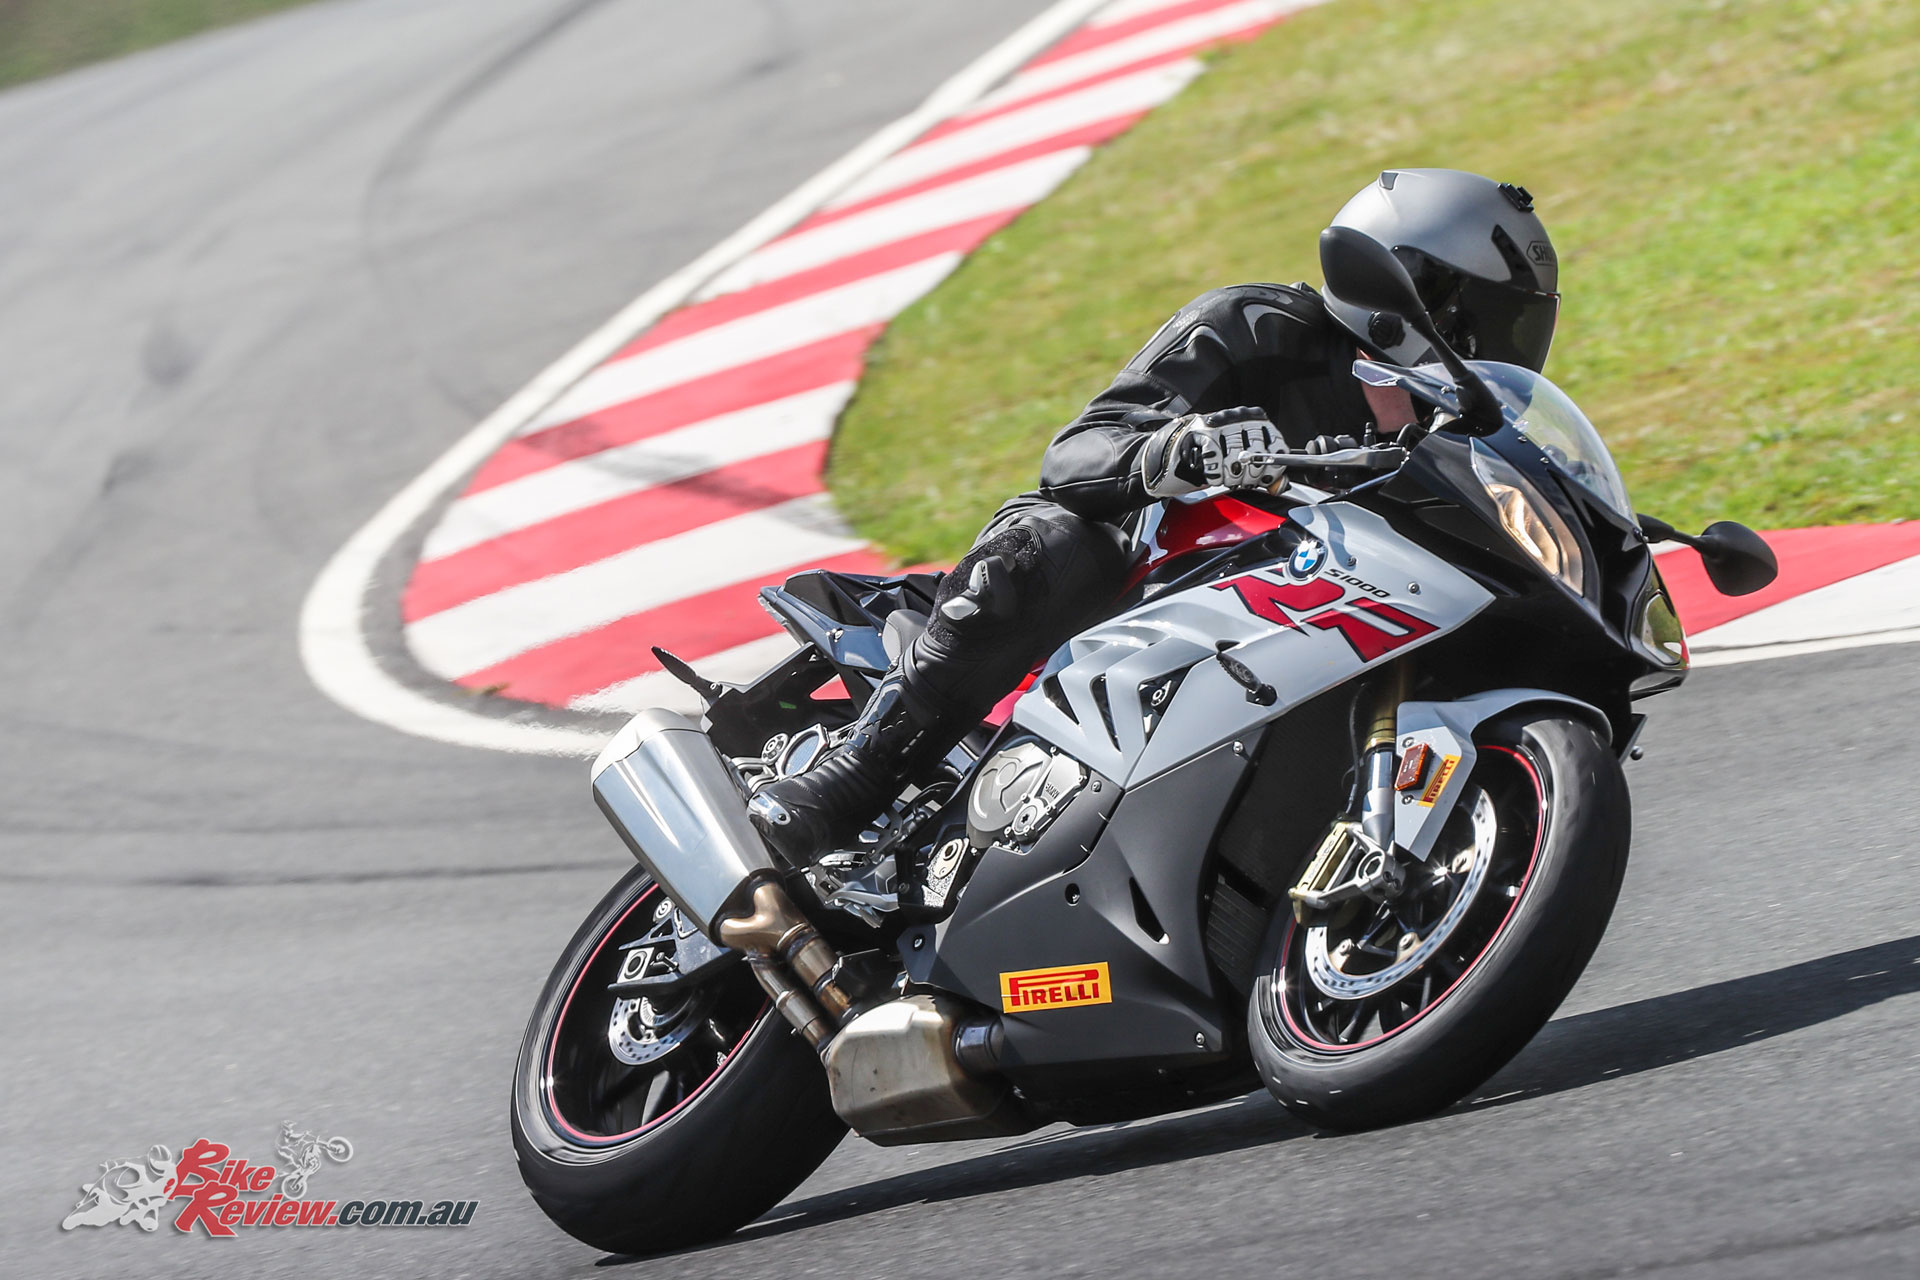 The Pirelli Diablo Rosso Corsa II's are just exceptional on the track, especially if you're more used to road orientated tyres, with amazing grip, feel and confidence at full lean